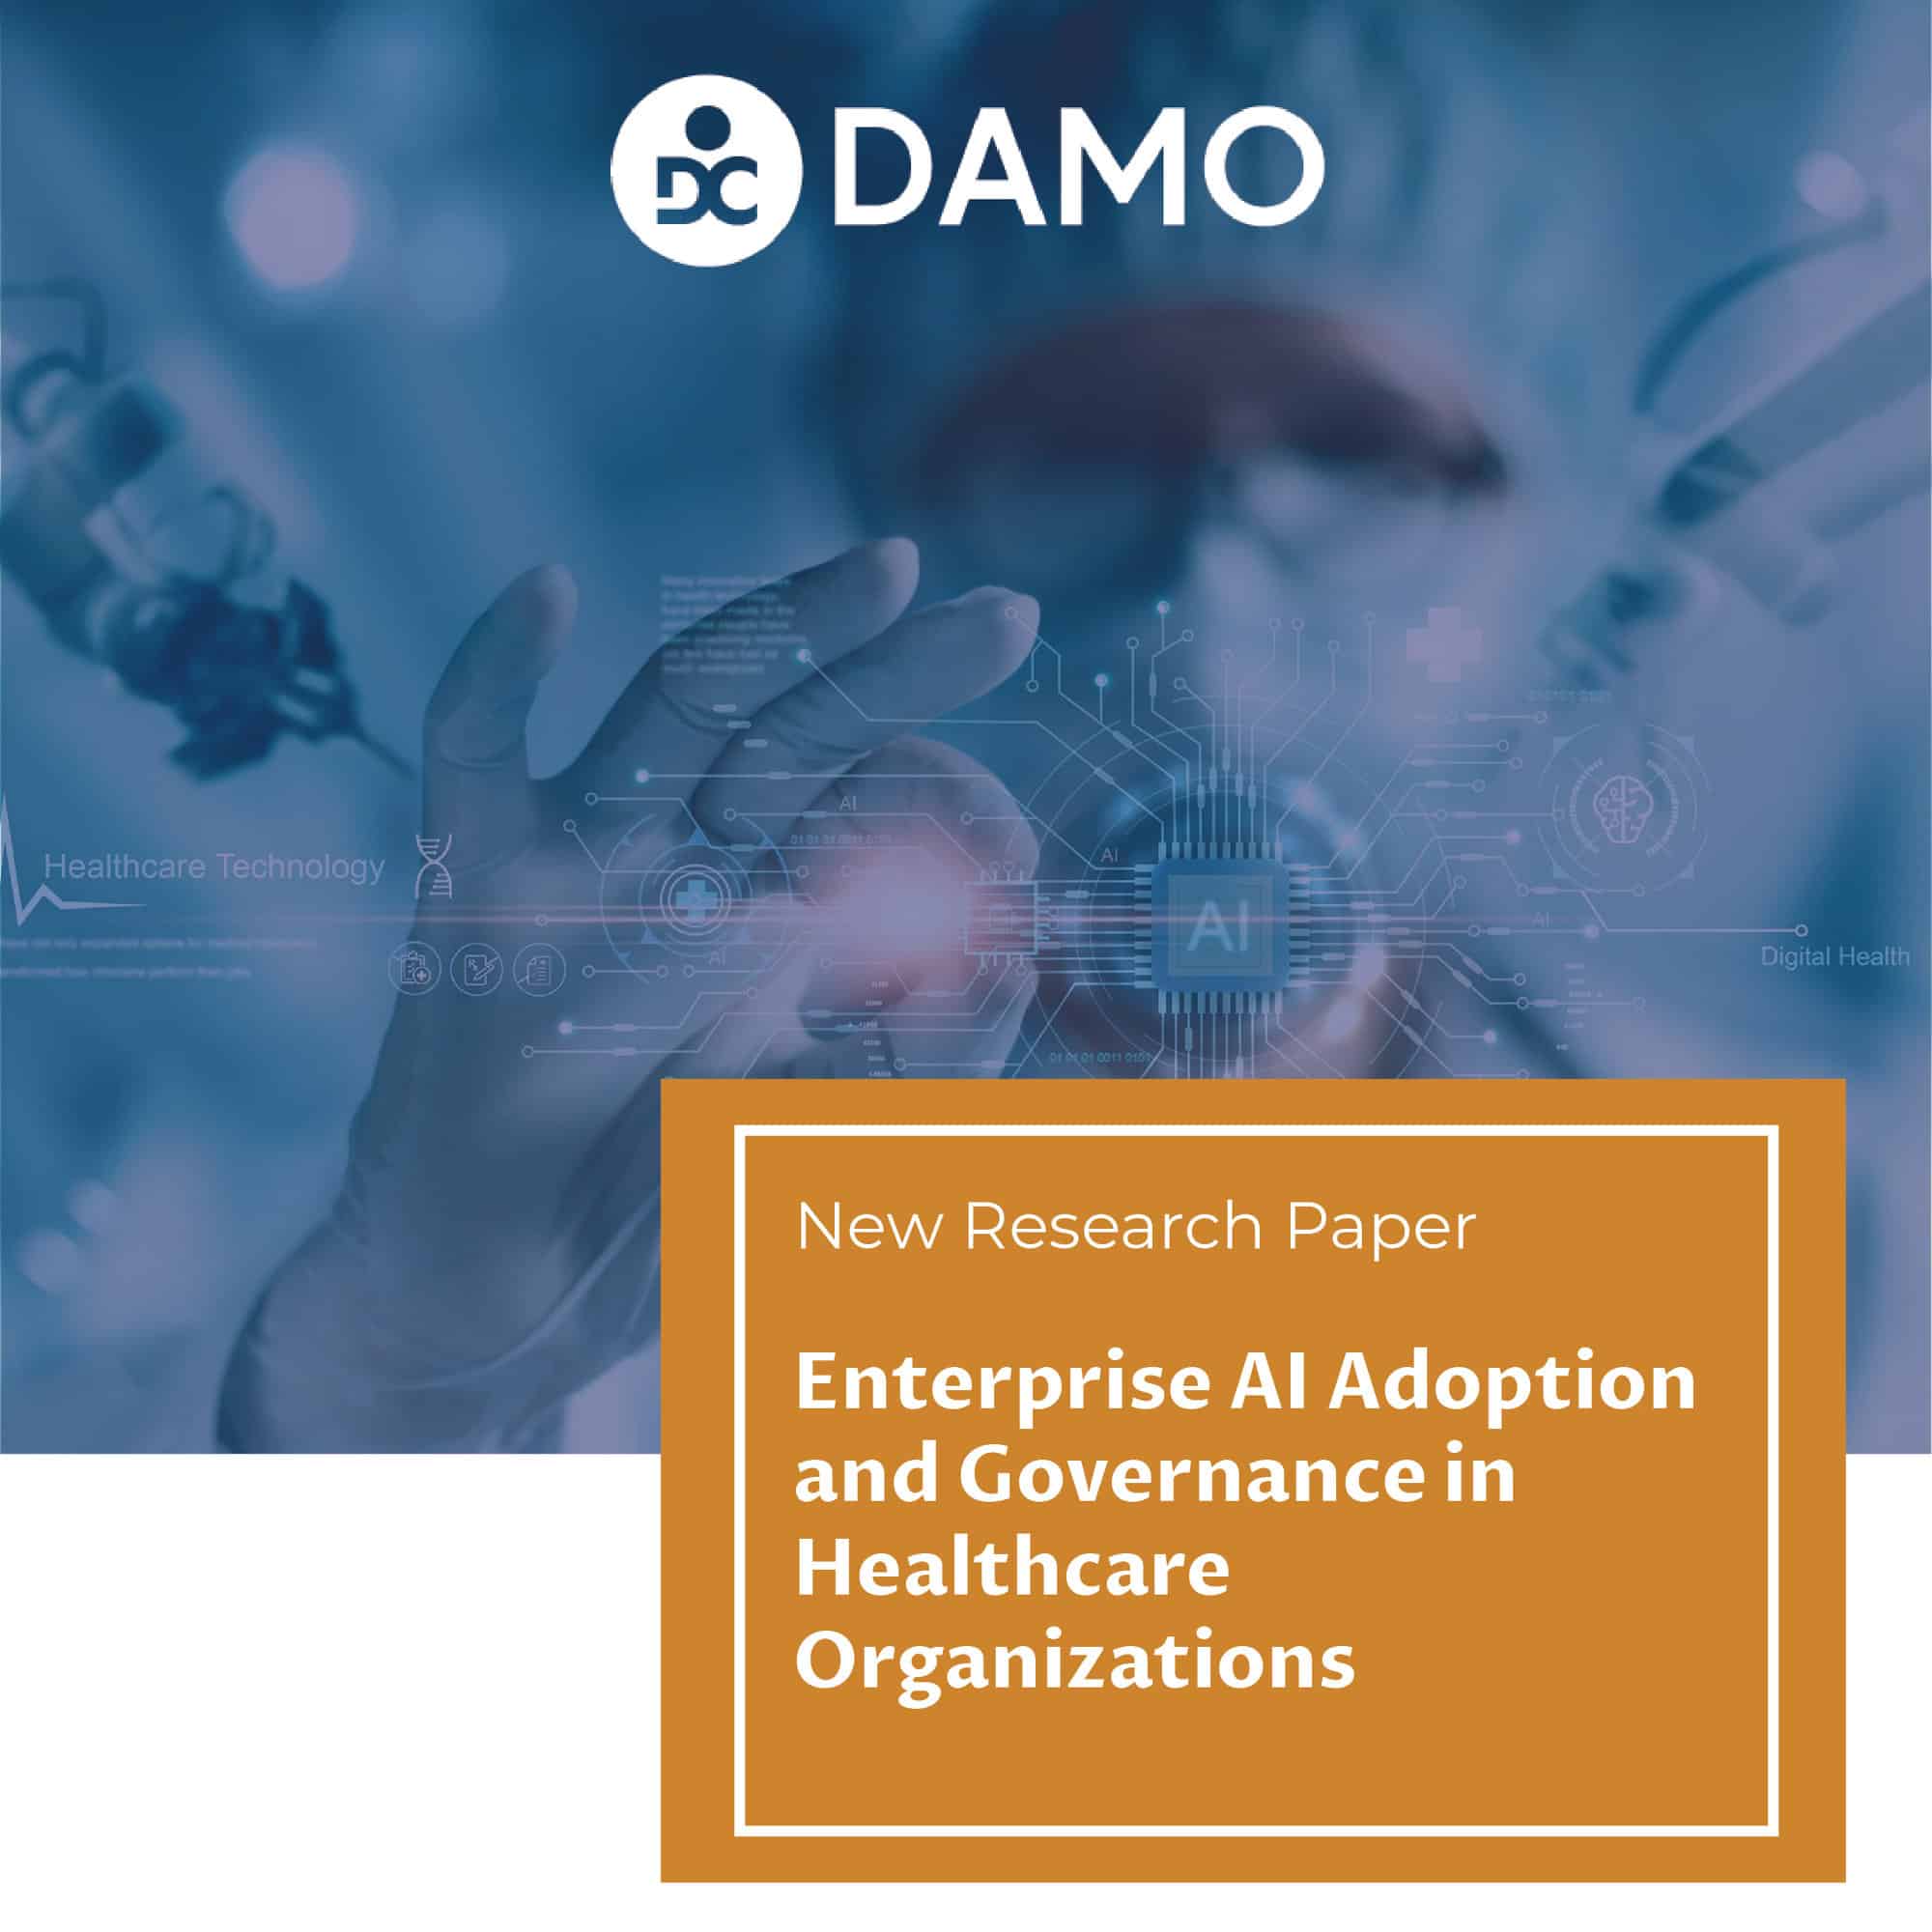 Enterprise AI Adoption and Governance in Healthcare Organizations